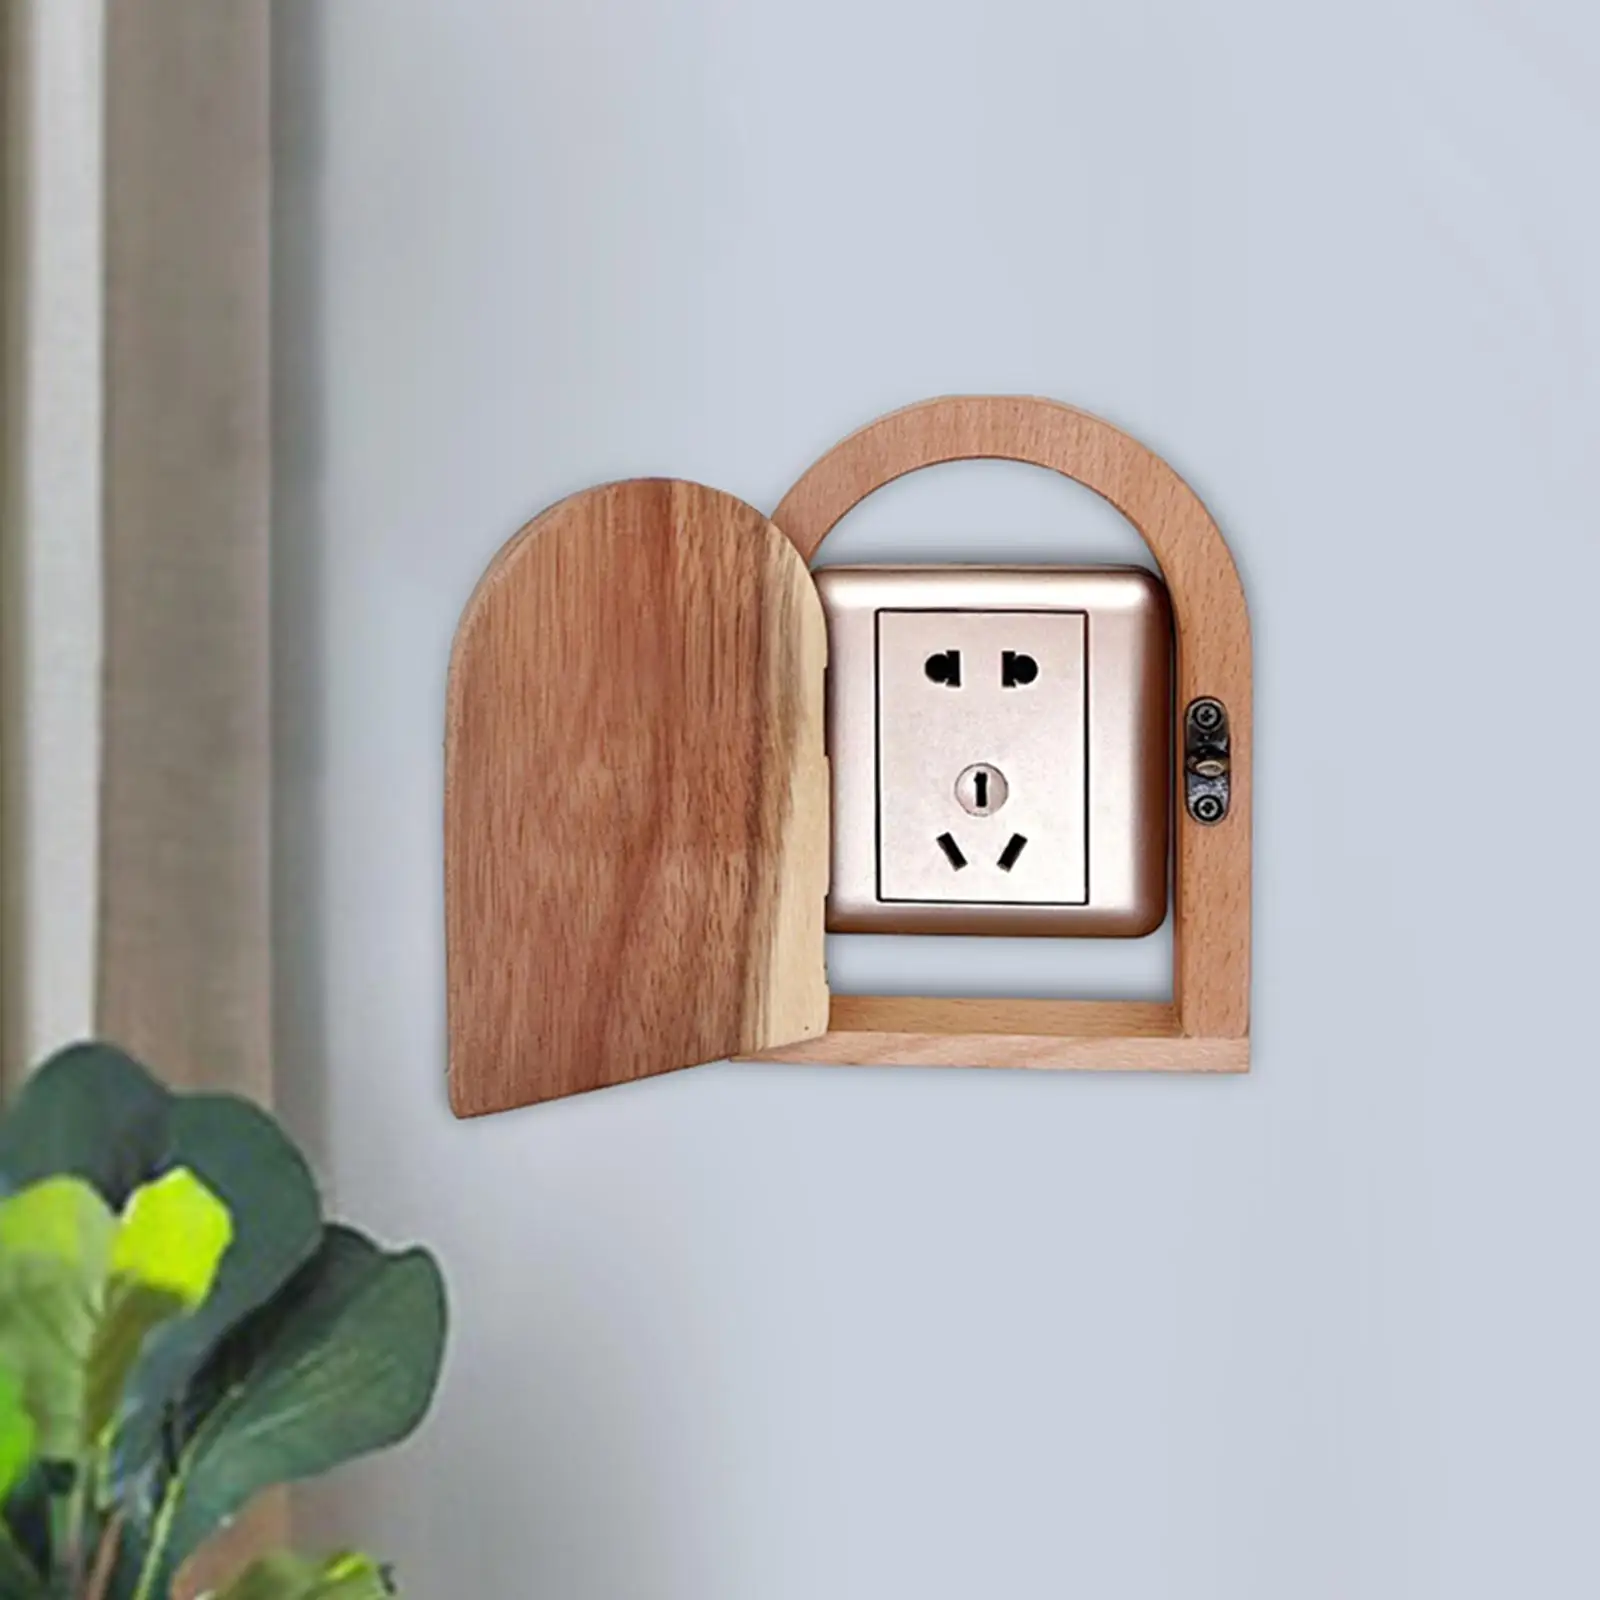 Outlet Covers Wooden Protective Switch Box Waterproof Socket Protectors for Warehouse Living Room Office Bedroom Power Outlet